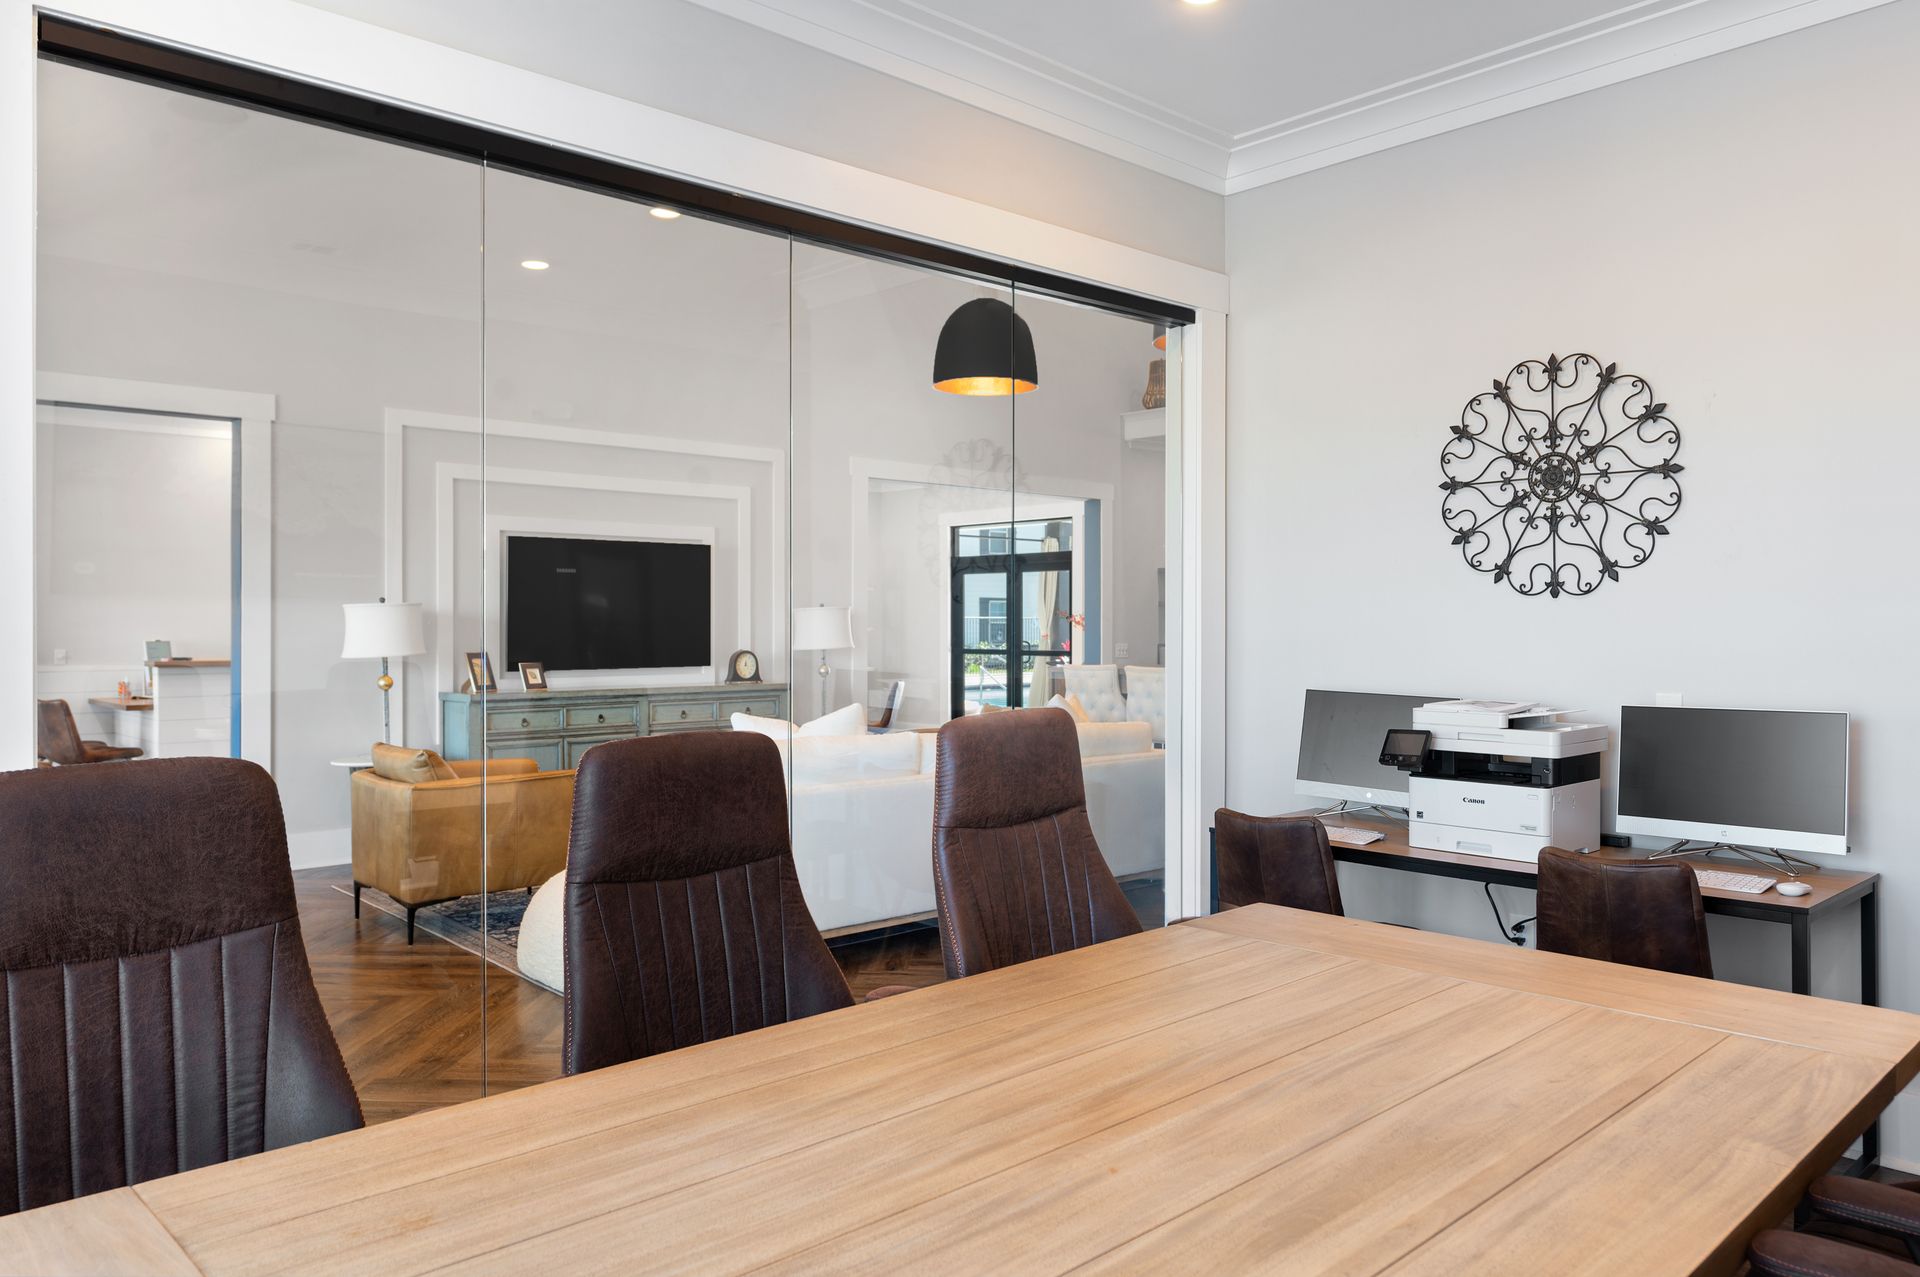 Apartment community conference room with a wooden table and chairs and a clock on the wall.